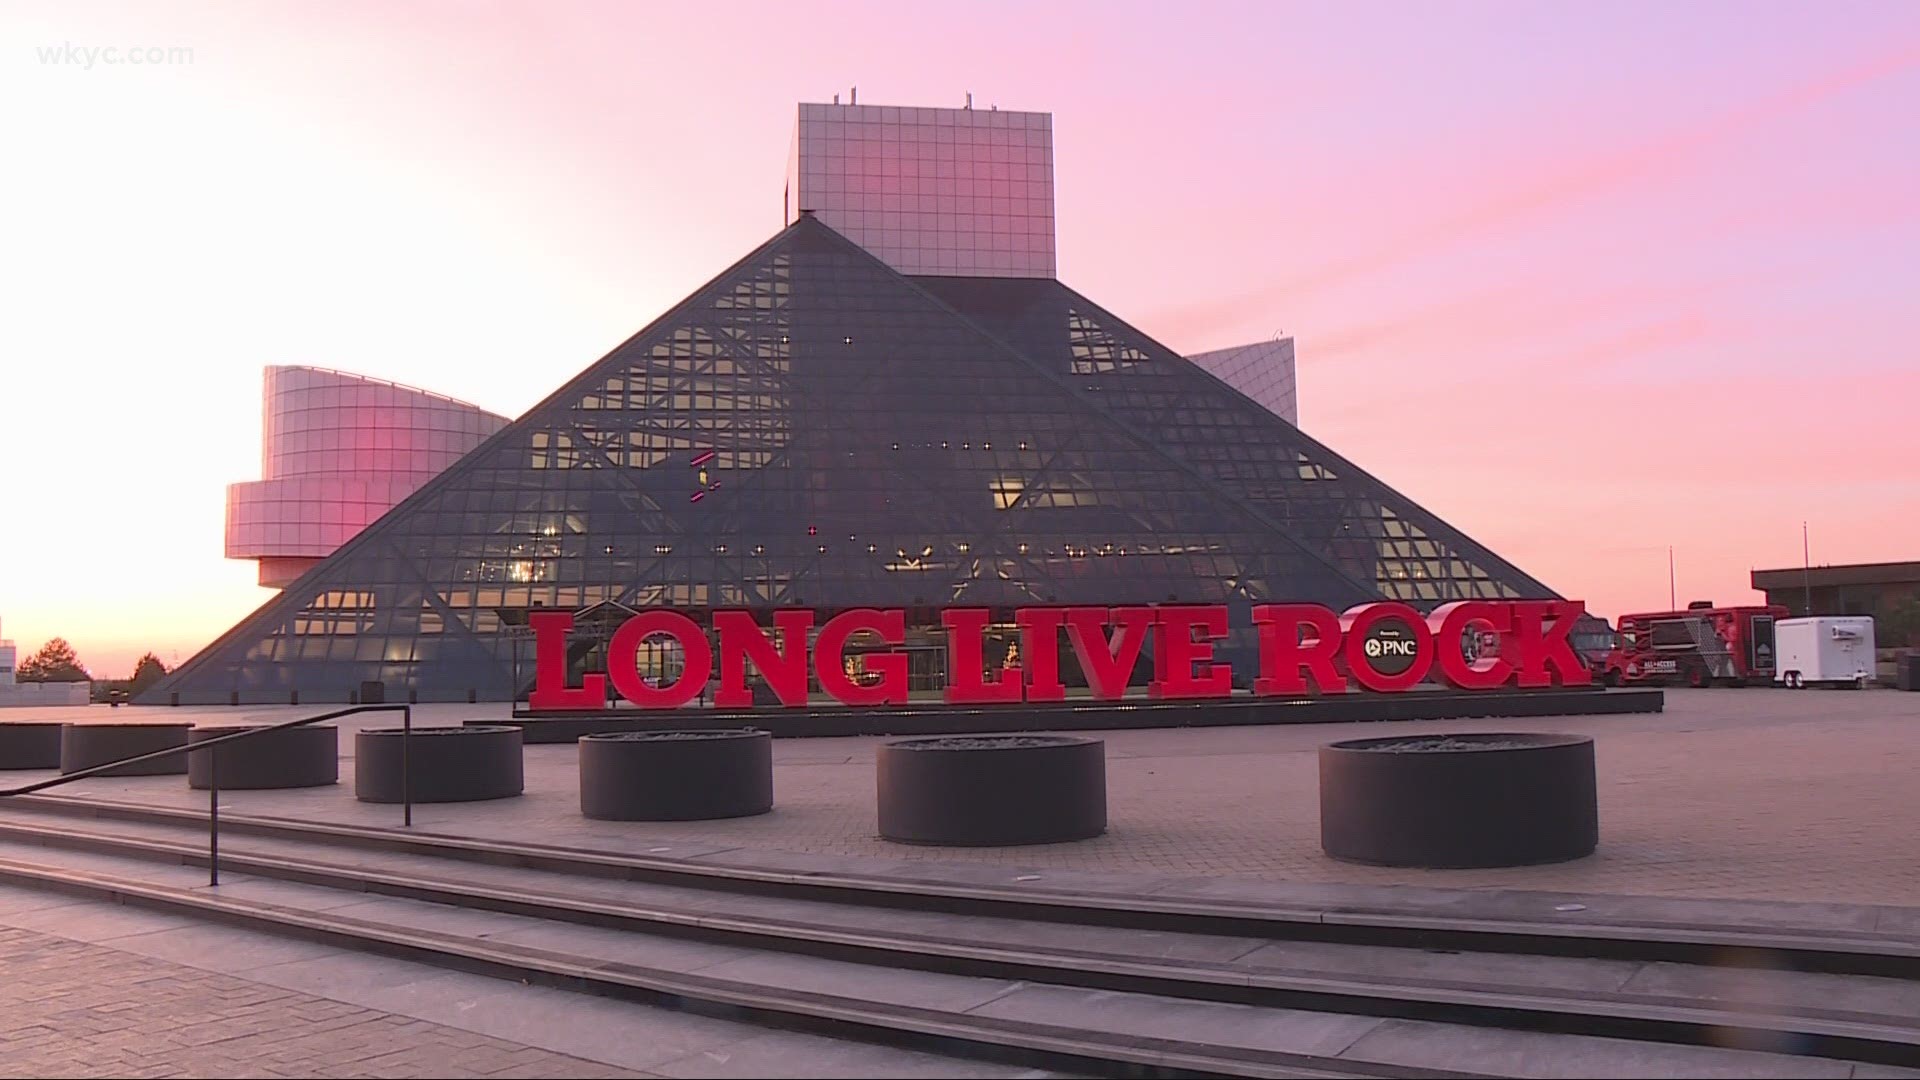 The Rock Hall issued a statement on the closure Saturday. There is no word on when it will reopen.